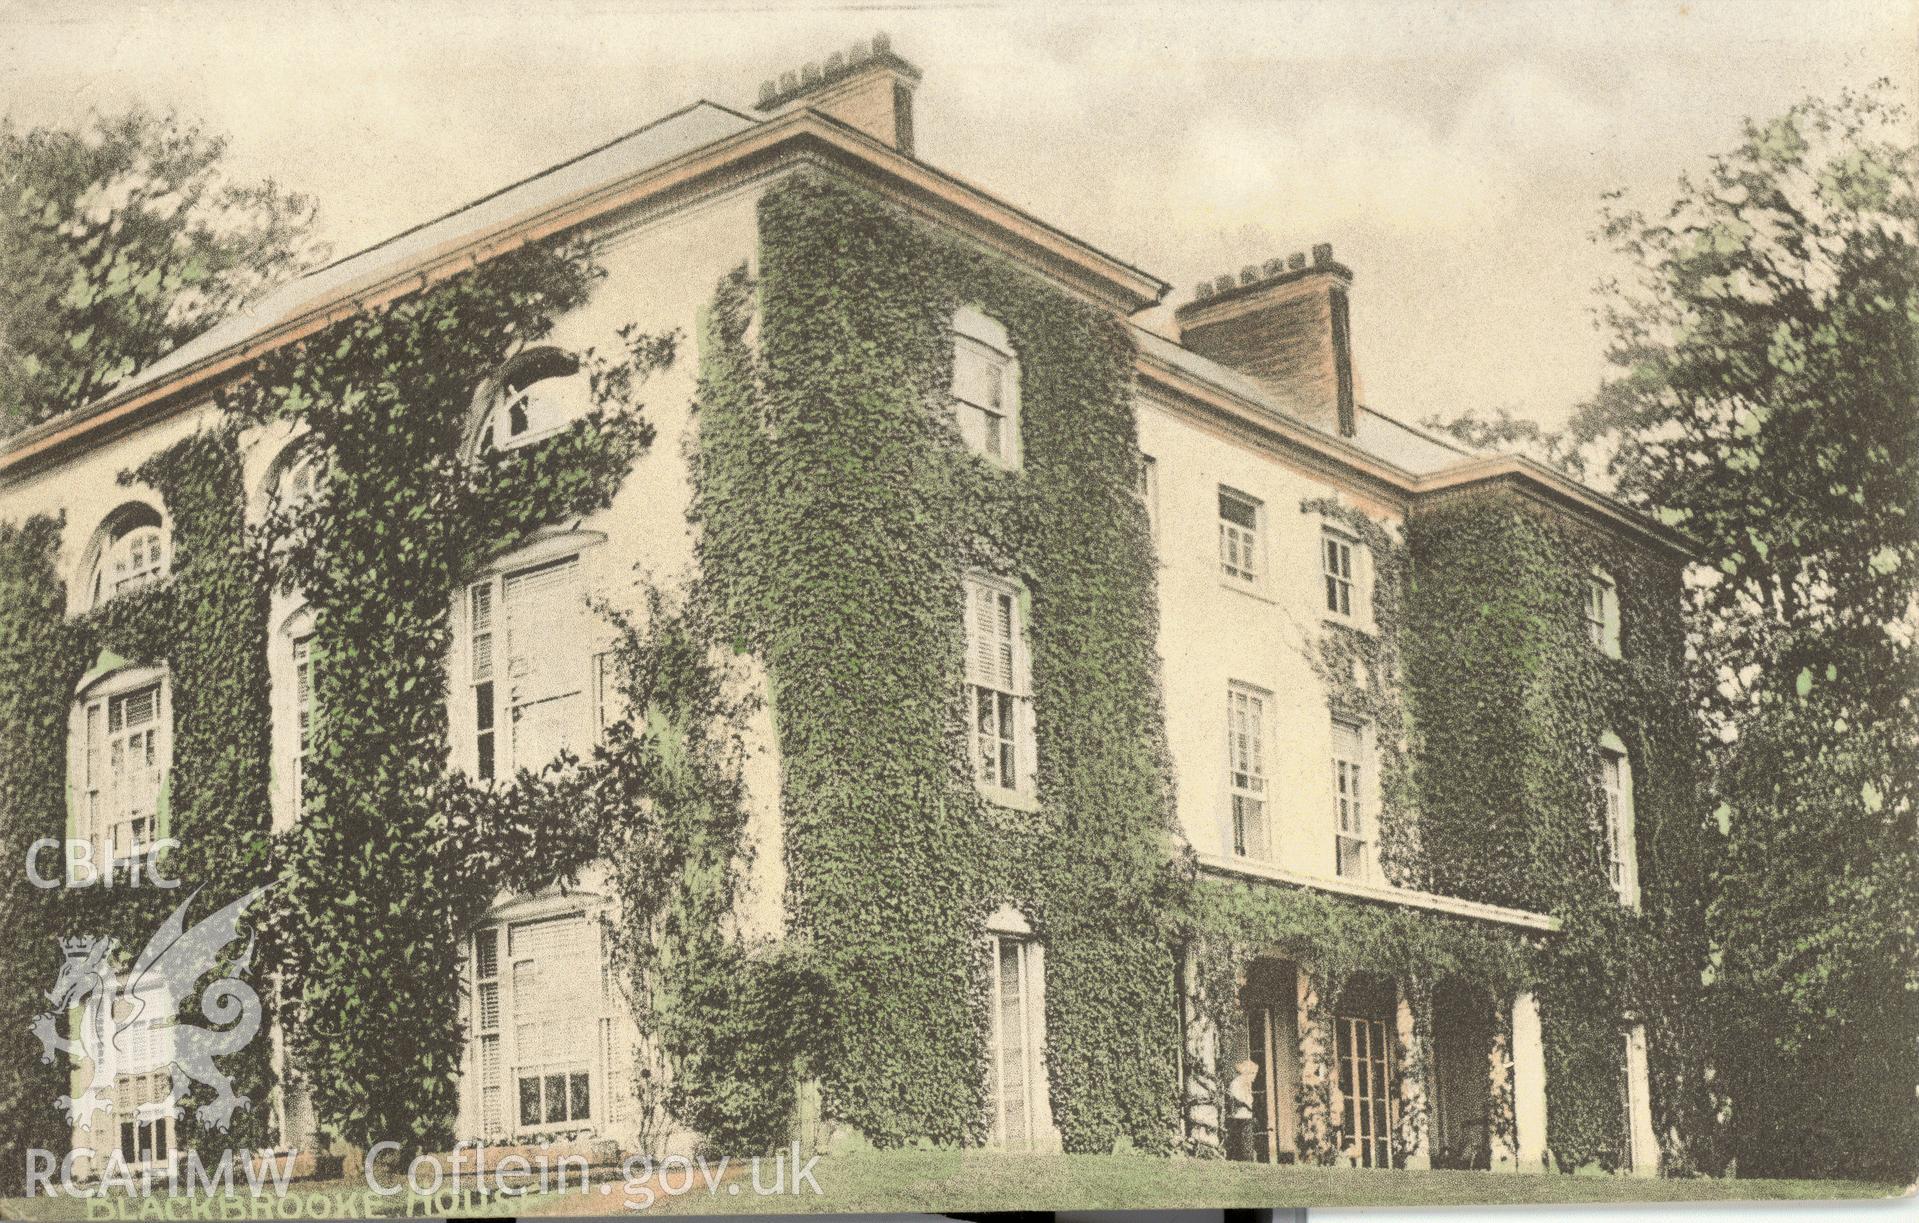 Digitised postcard image of Blackbrooke House, Llangattock-vibon-avel. Produced by Parks and Gardens Data Services, from an original item in the Peter Davis Collection at Parks and Gardens UK. We hold only web-resolution images of this collection, suitable for viewing on screen and for research purposes only. We do not hold the original images, or publication quality scans.